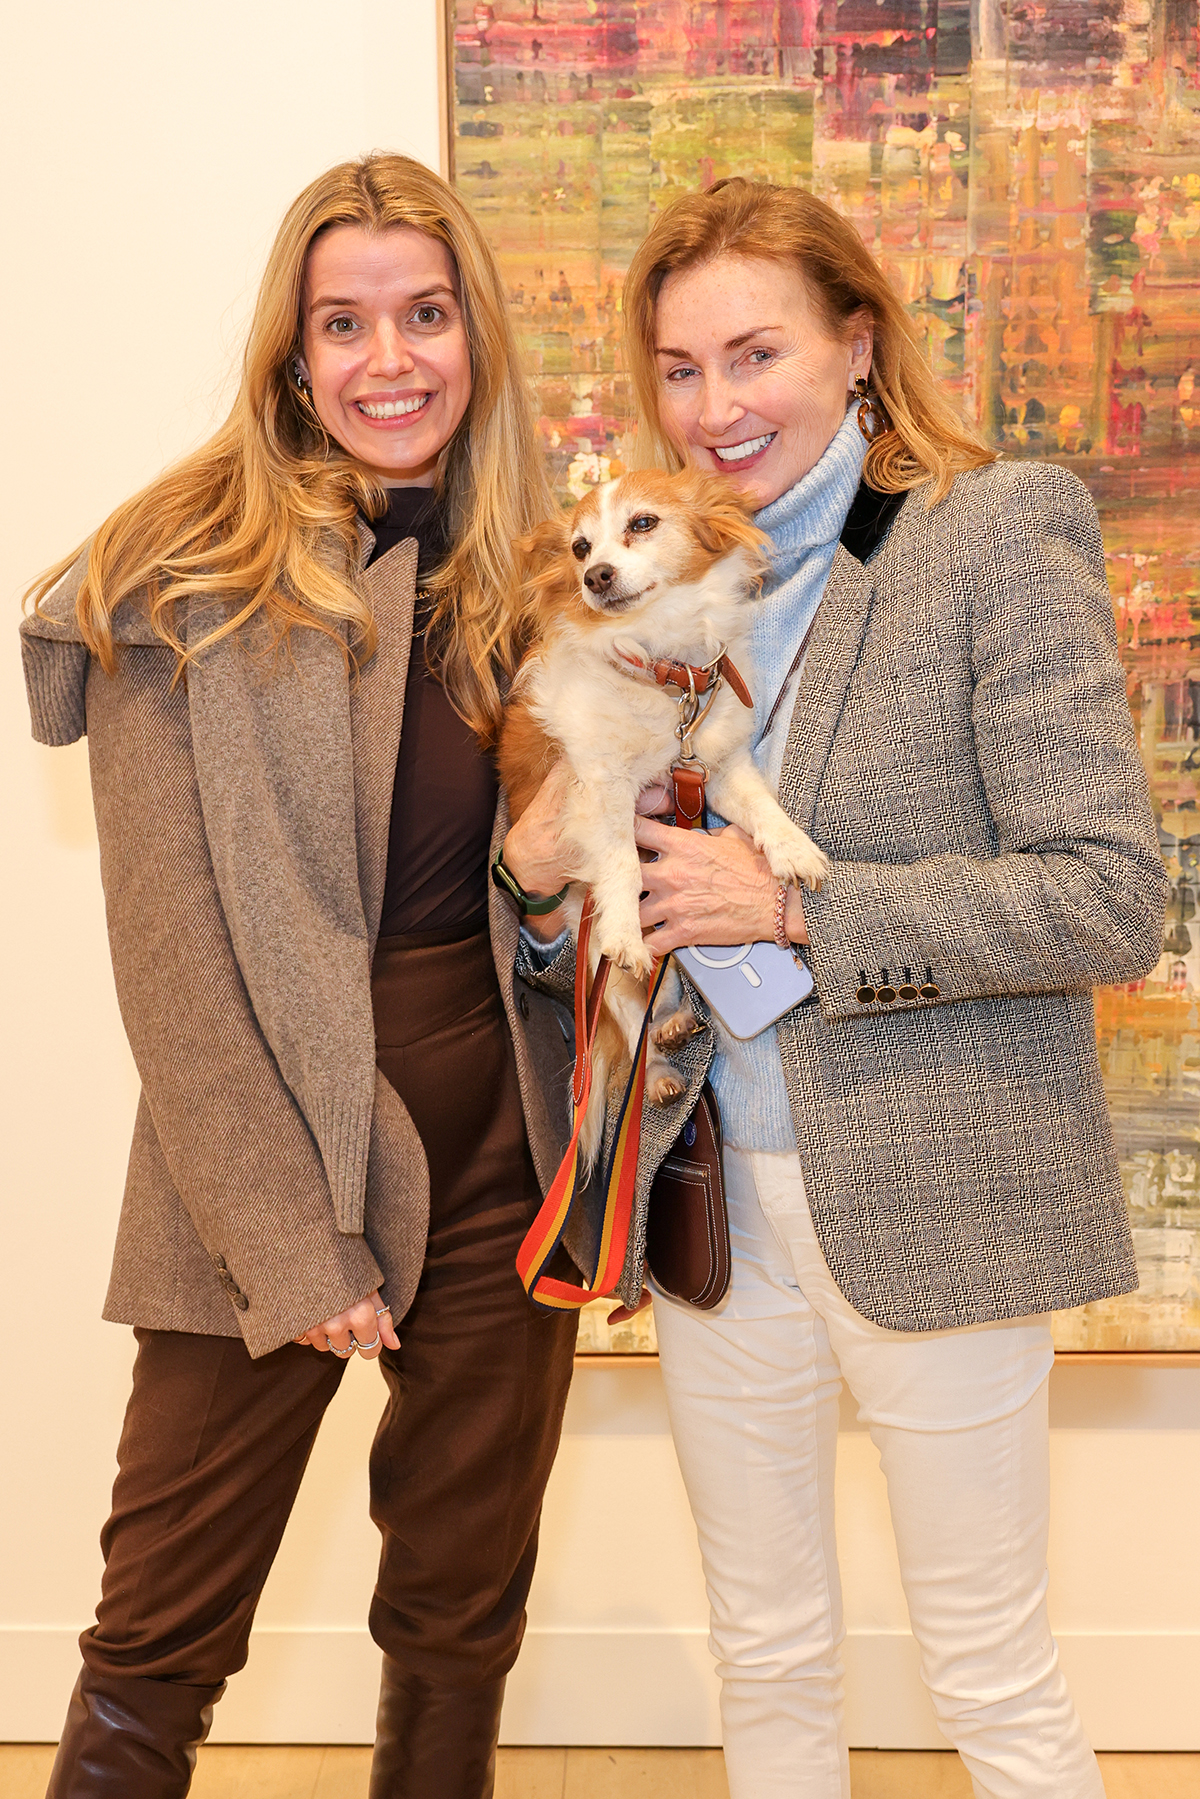 Two women posing for a photo holding a dog